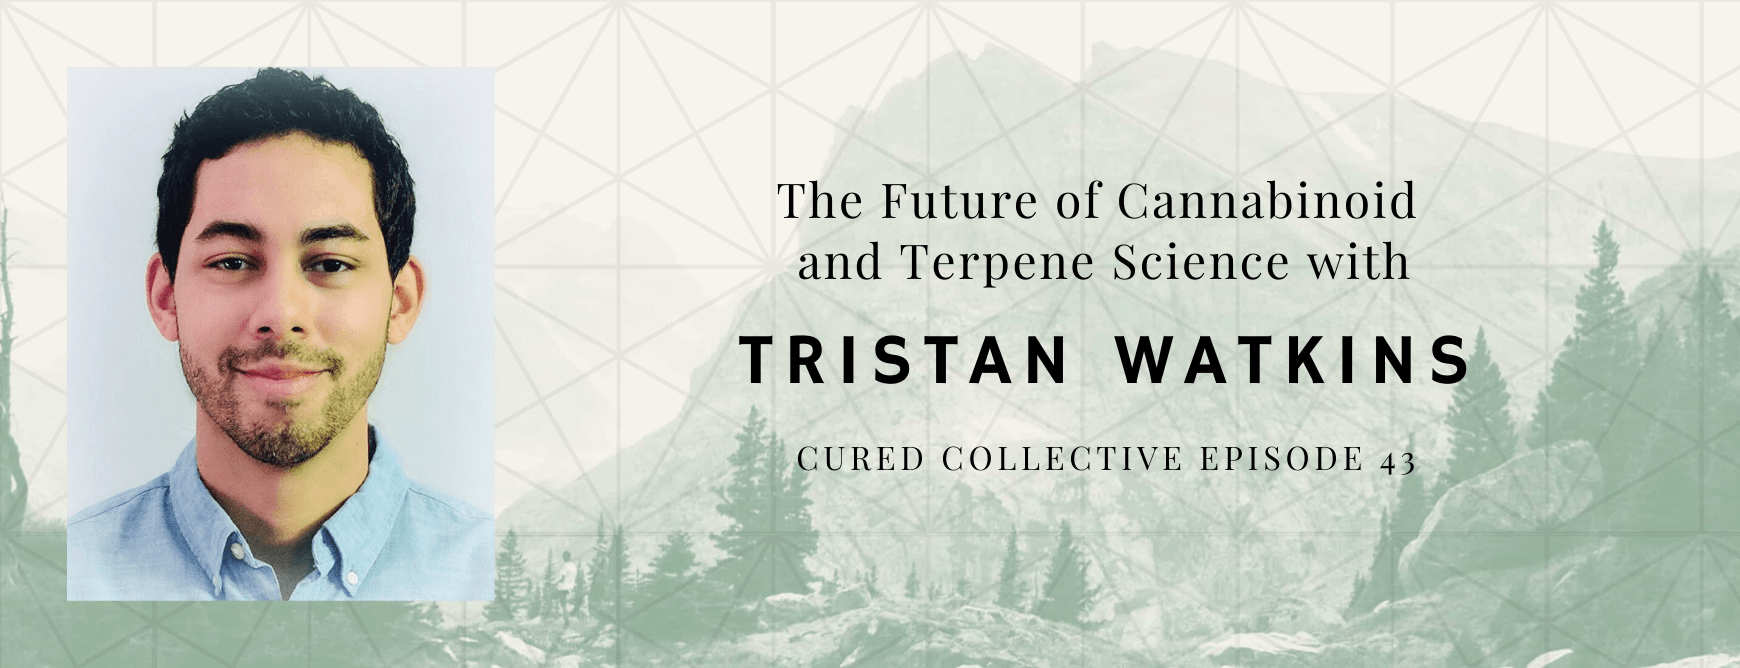 Cured Collective CBD Podcast with Tristan Watkins